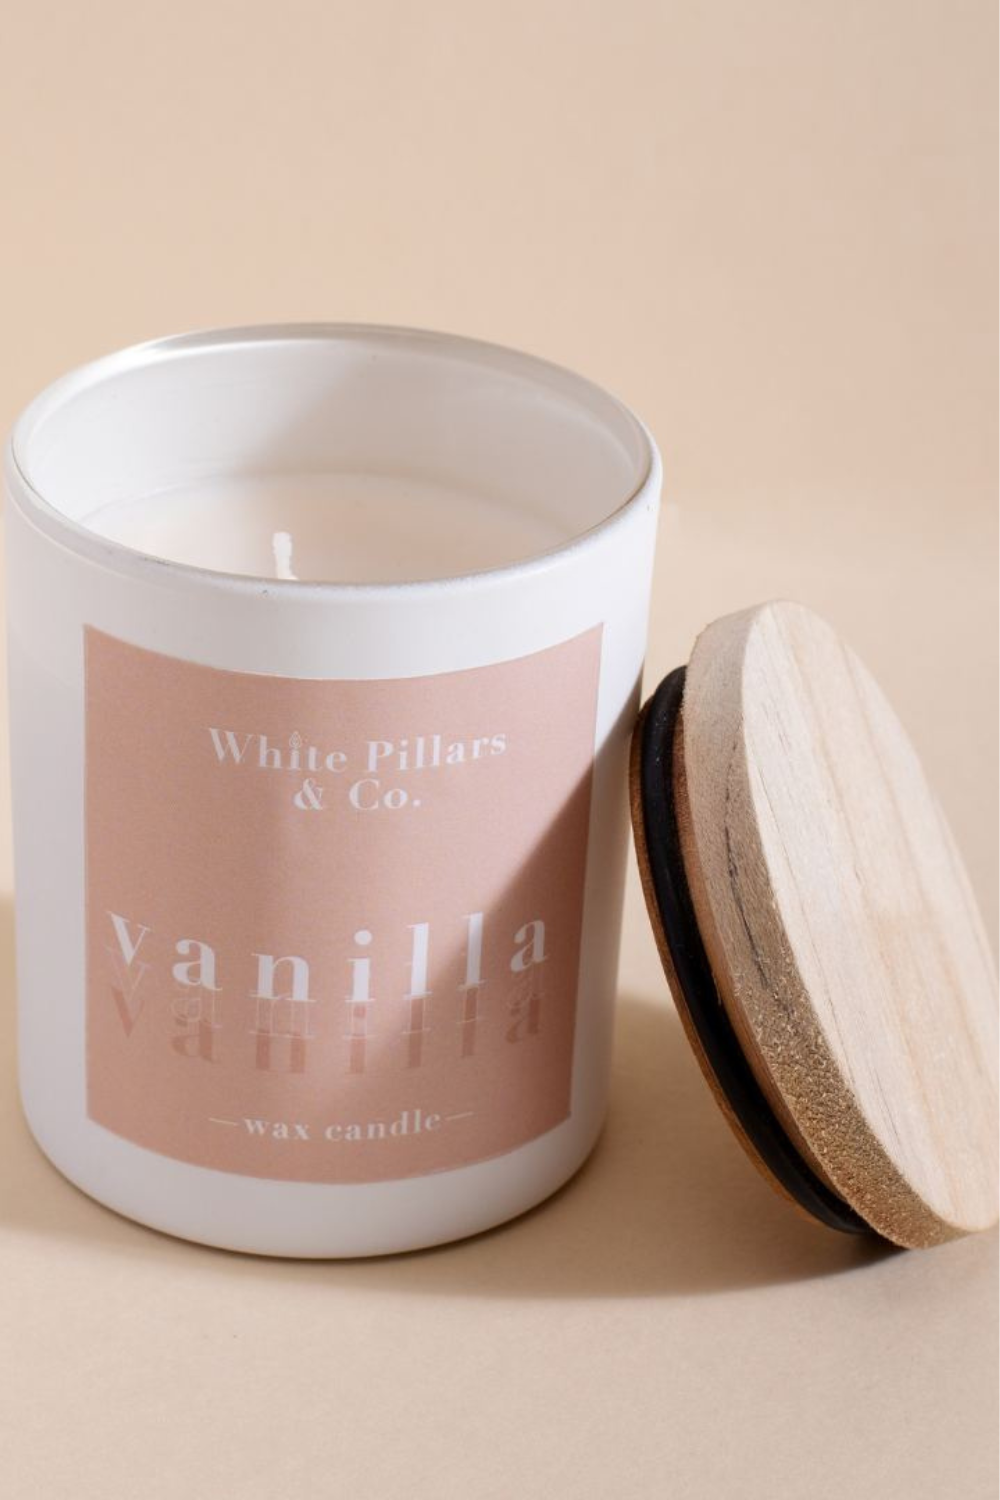 vanilla-scented-candle